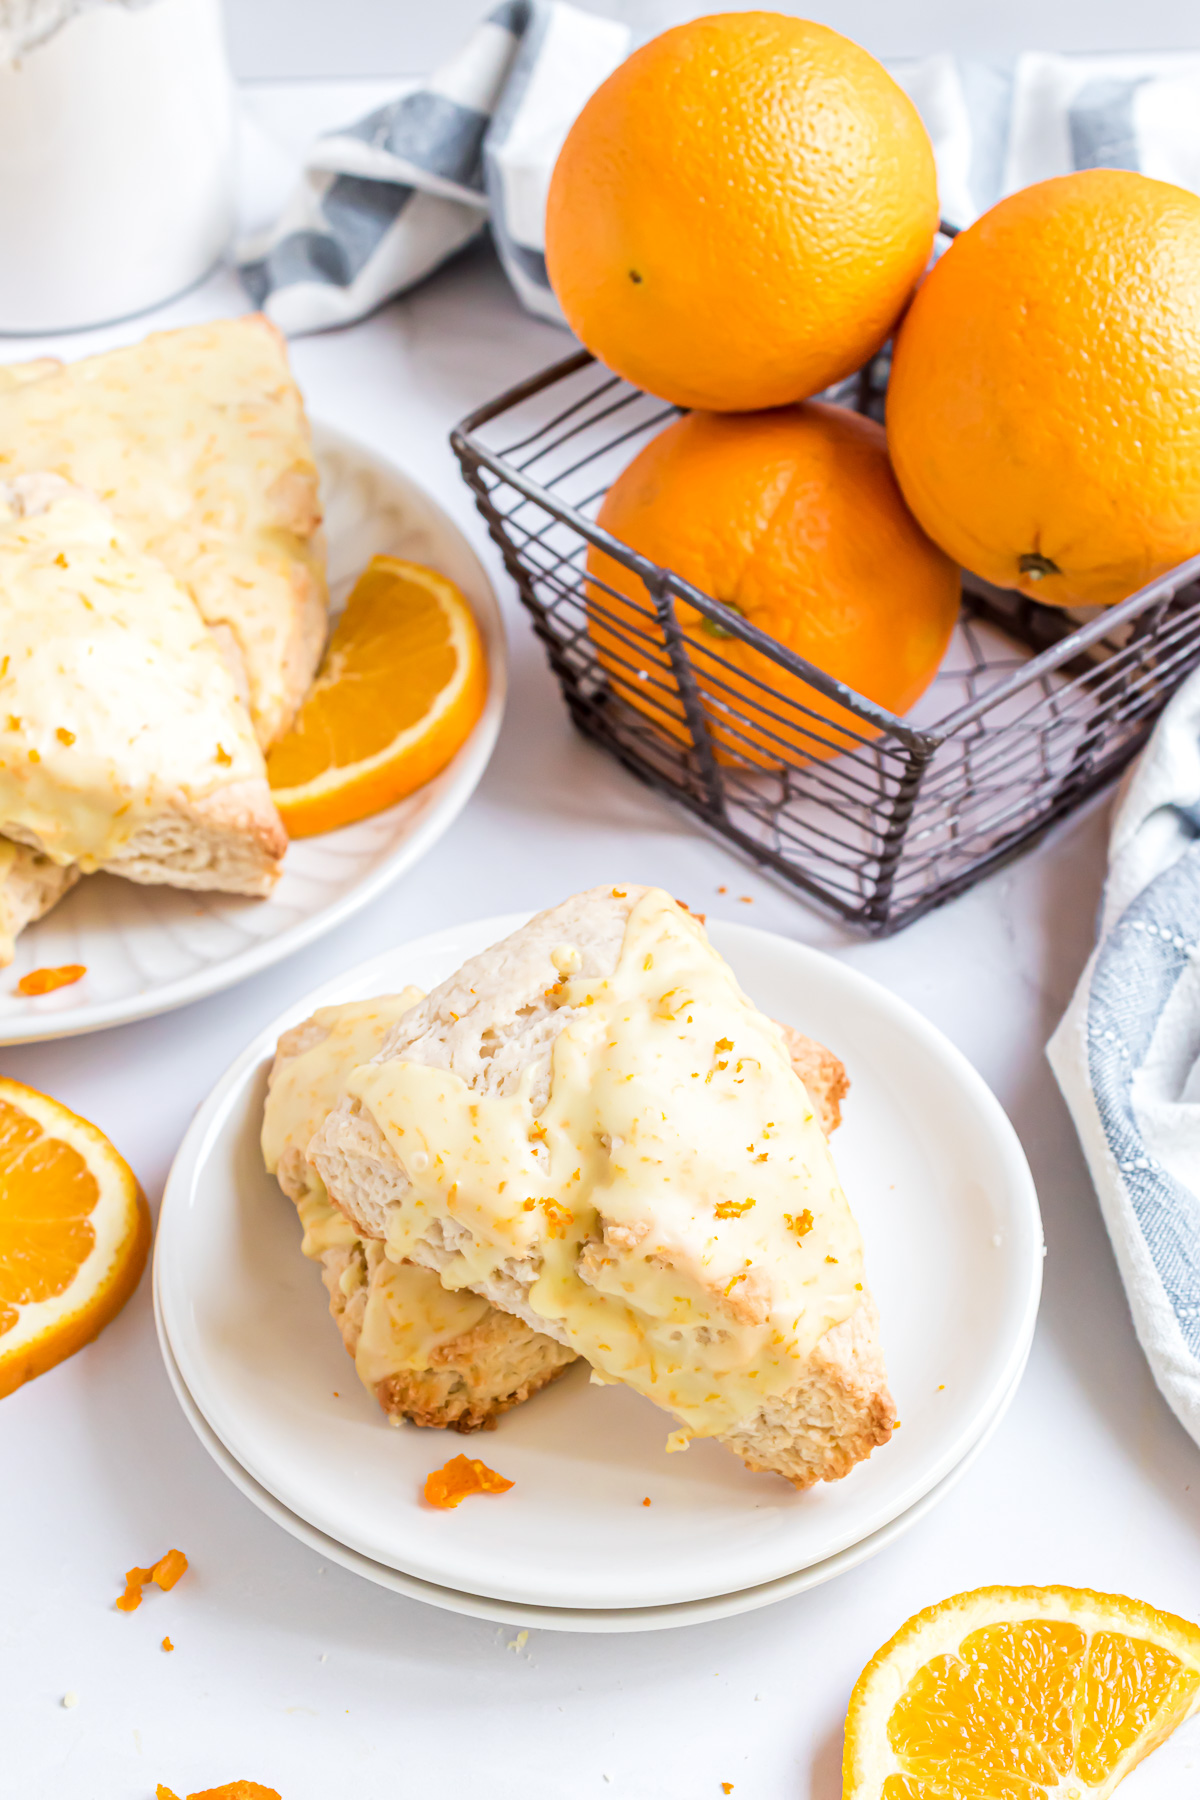 Two copycat panera bread glazed orange scones on a plate surrounded by orange slices and a basket of oranges and a serving plate full of scones in the background.